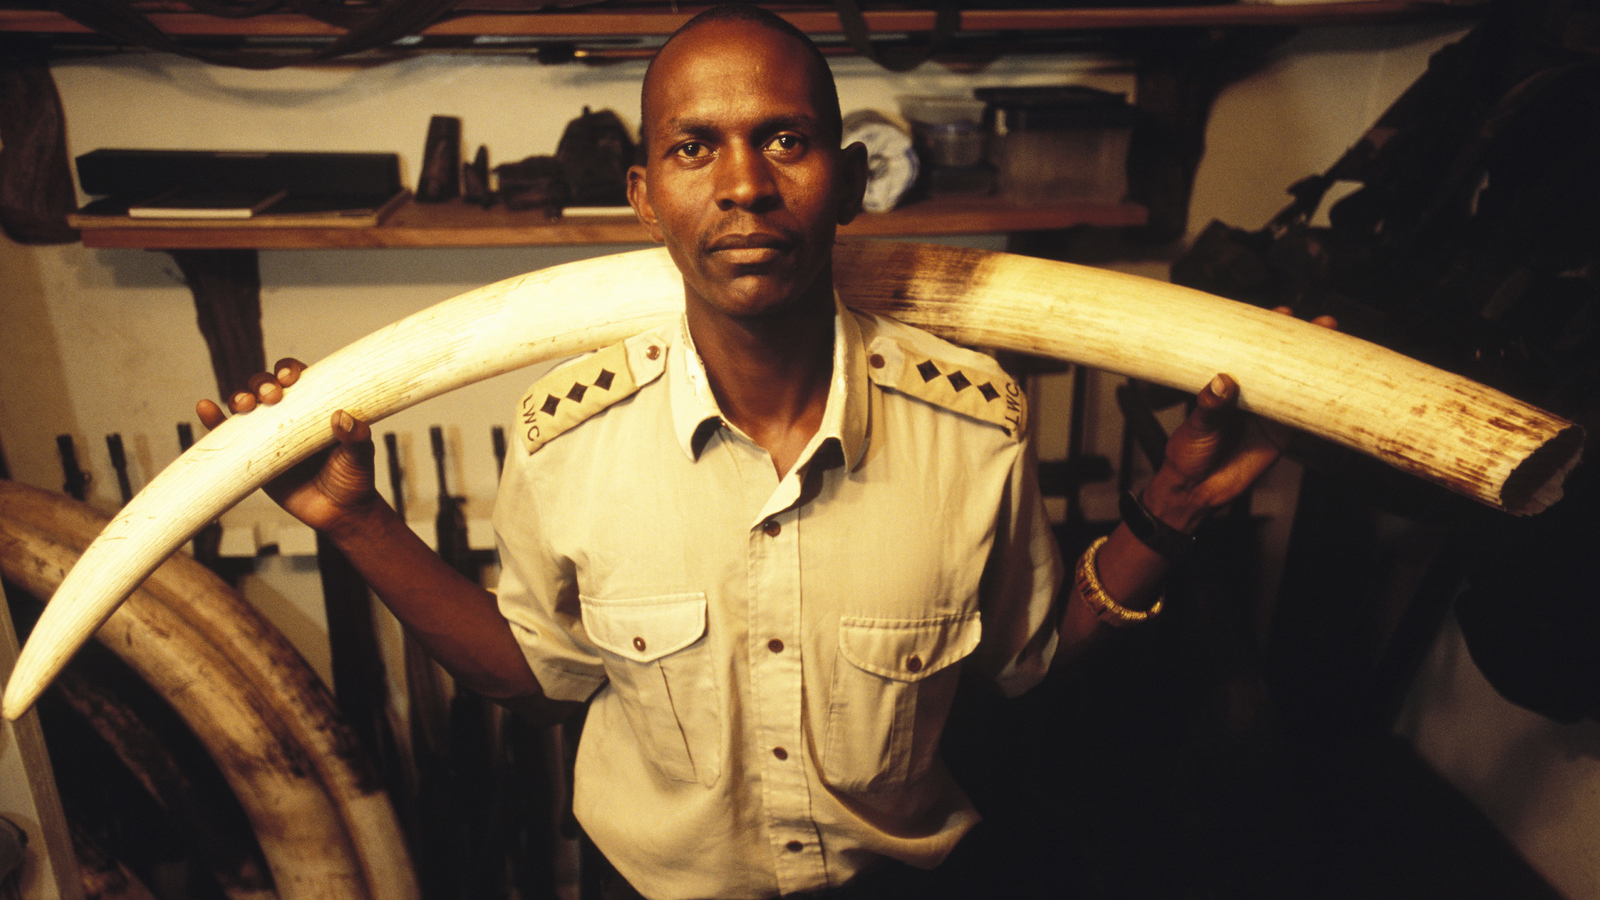 Michael Ntosho, head of security for Lewa Wildlife Conservancy, with ivory confiscated from poachers at the armoury at Lewa headquarters in Kenya. Photo © Henner Frankenfeld/Redux Pictures